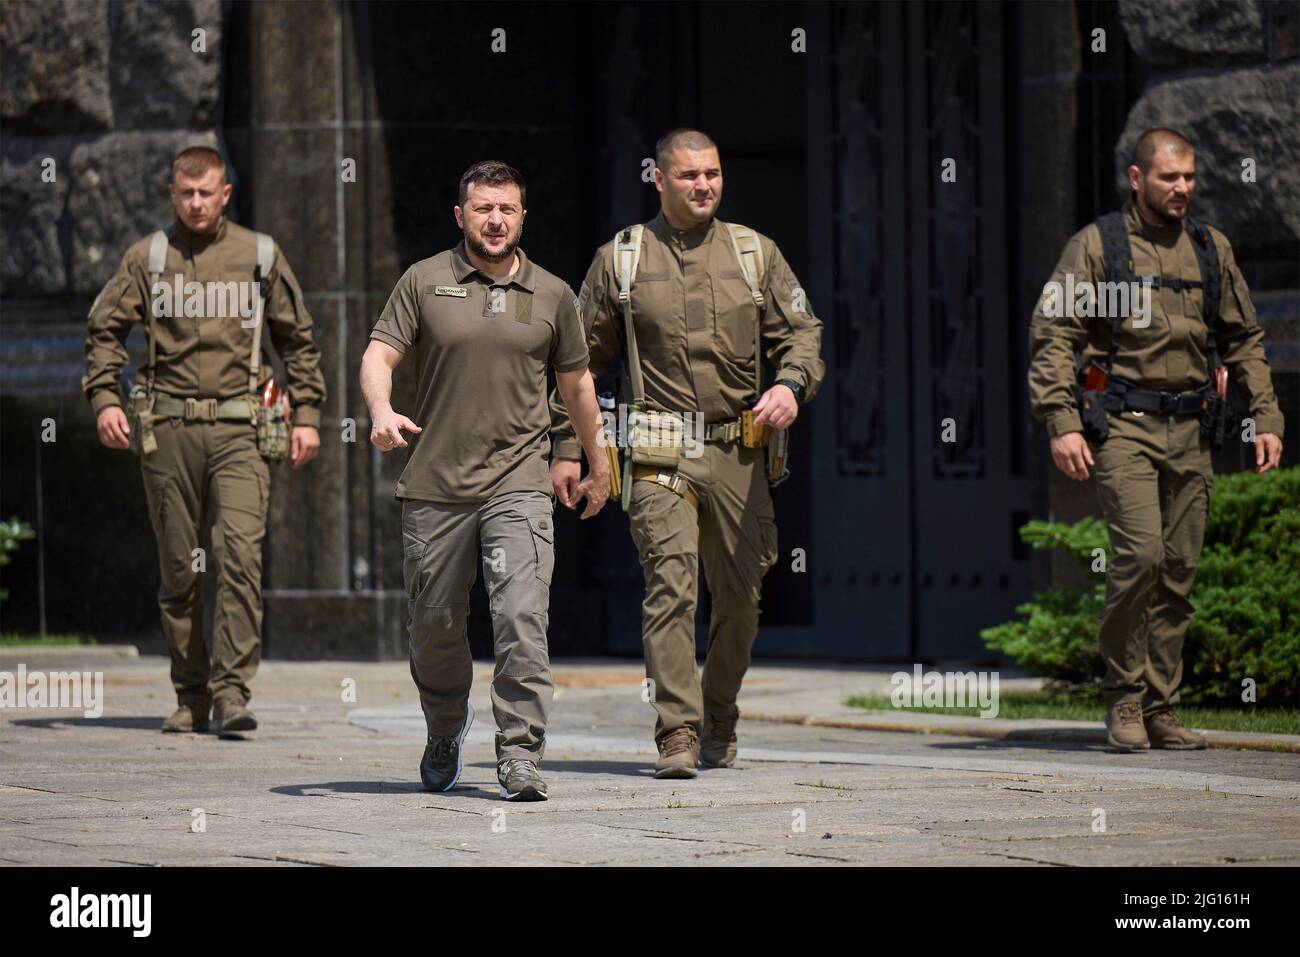 Kyiv, Ukraine. 06th July, 2022. Ukrainian President Volodymyr Zelenskyy, center, walks with his security team to welcome Irish Prime Minister Micheal Martin, at the Presidential Administration Building, July 6, 2022 in Kyiv, Ukraine. Credit: Ukraine Presidency/Ukrainian Presidential Press Office/Alamy Live News Stock Photo